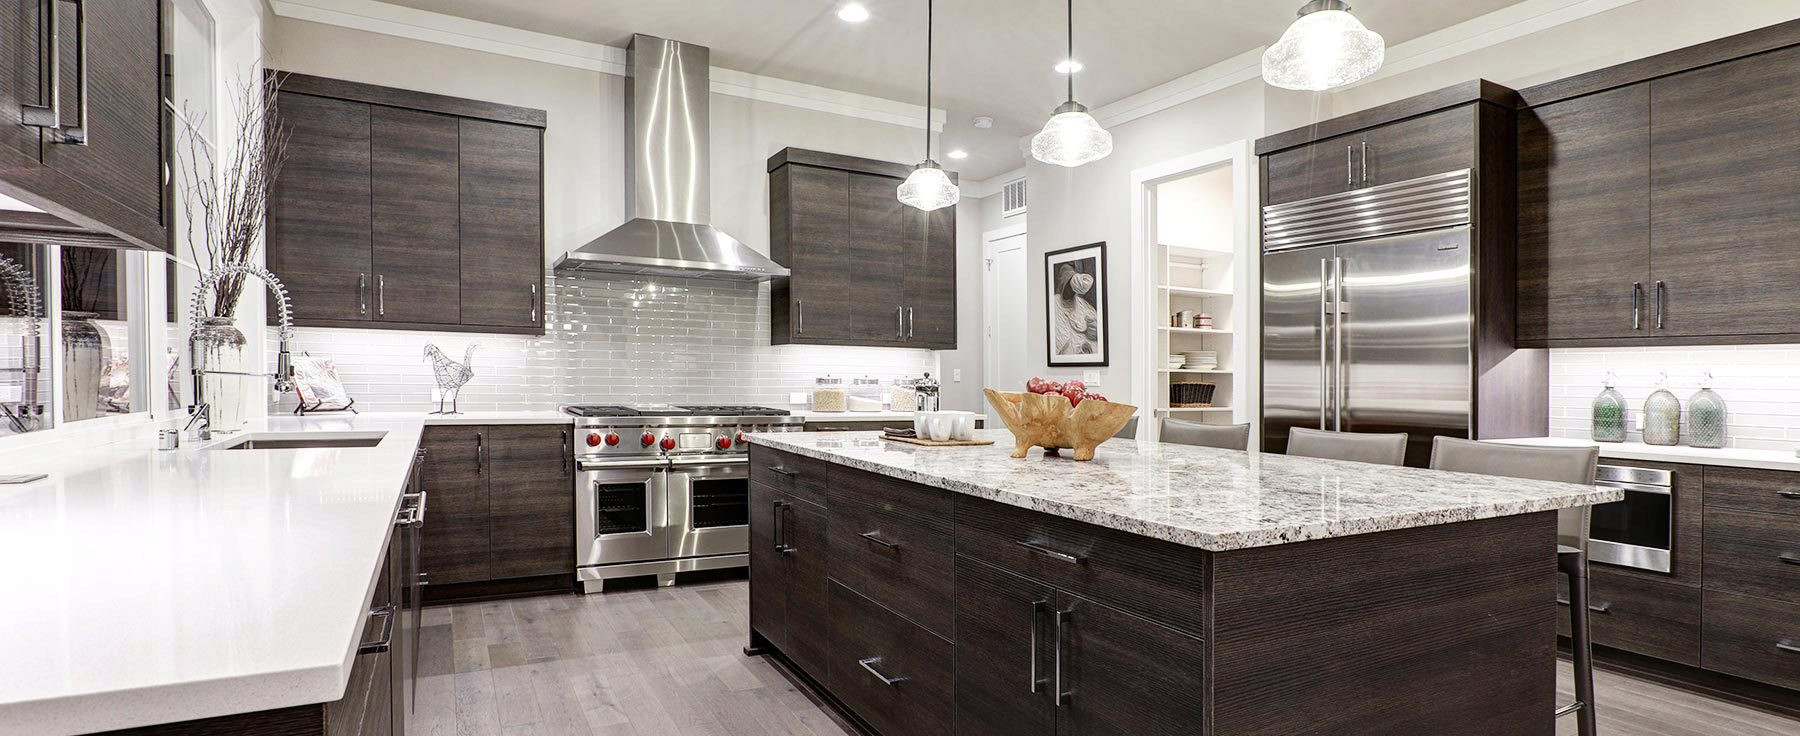 Kitchen Remodeling Costs Estimates
 How Much Does it Cost to Remodel a Kitchen in 2019